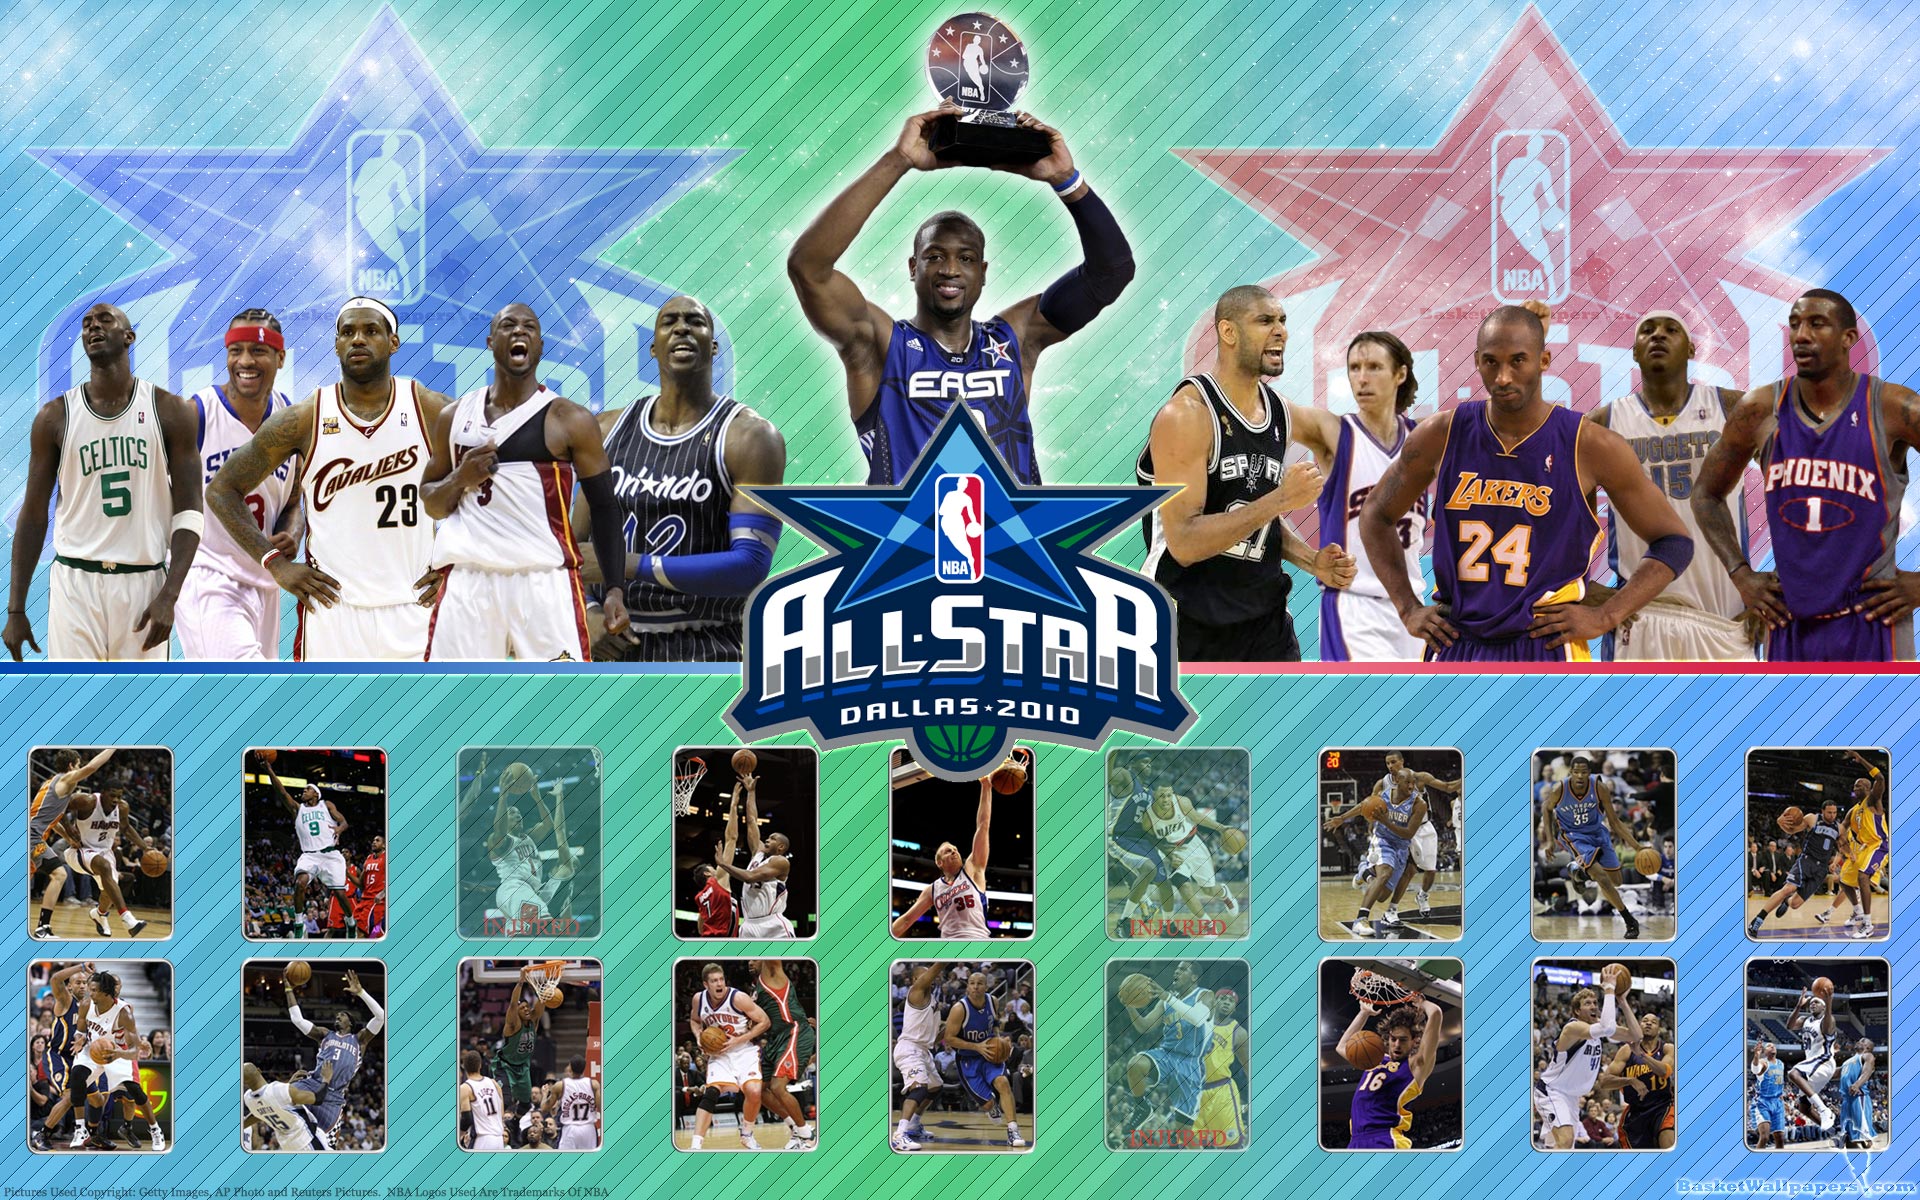 2010 nba all star game schedule